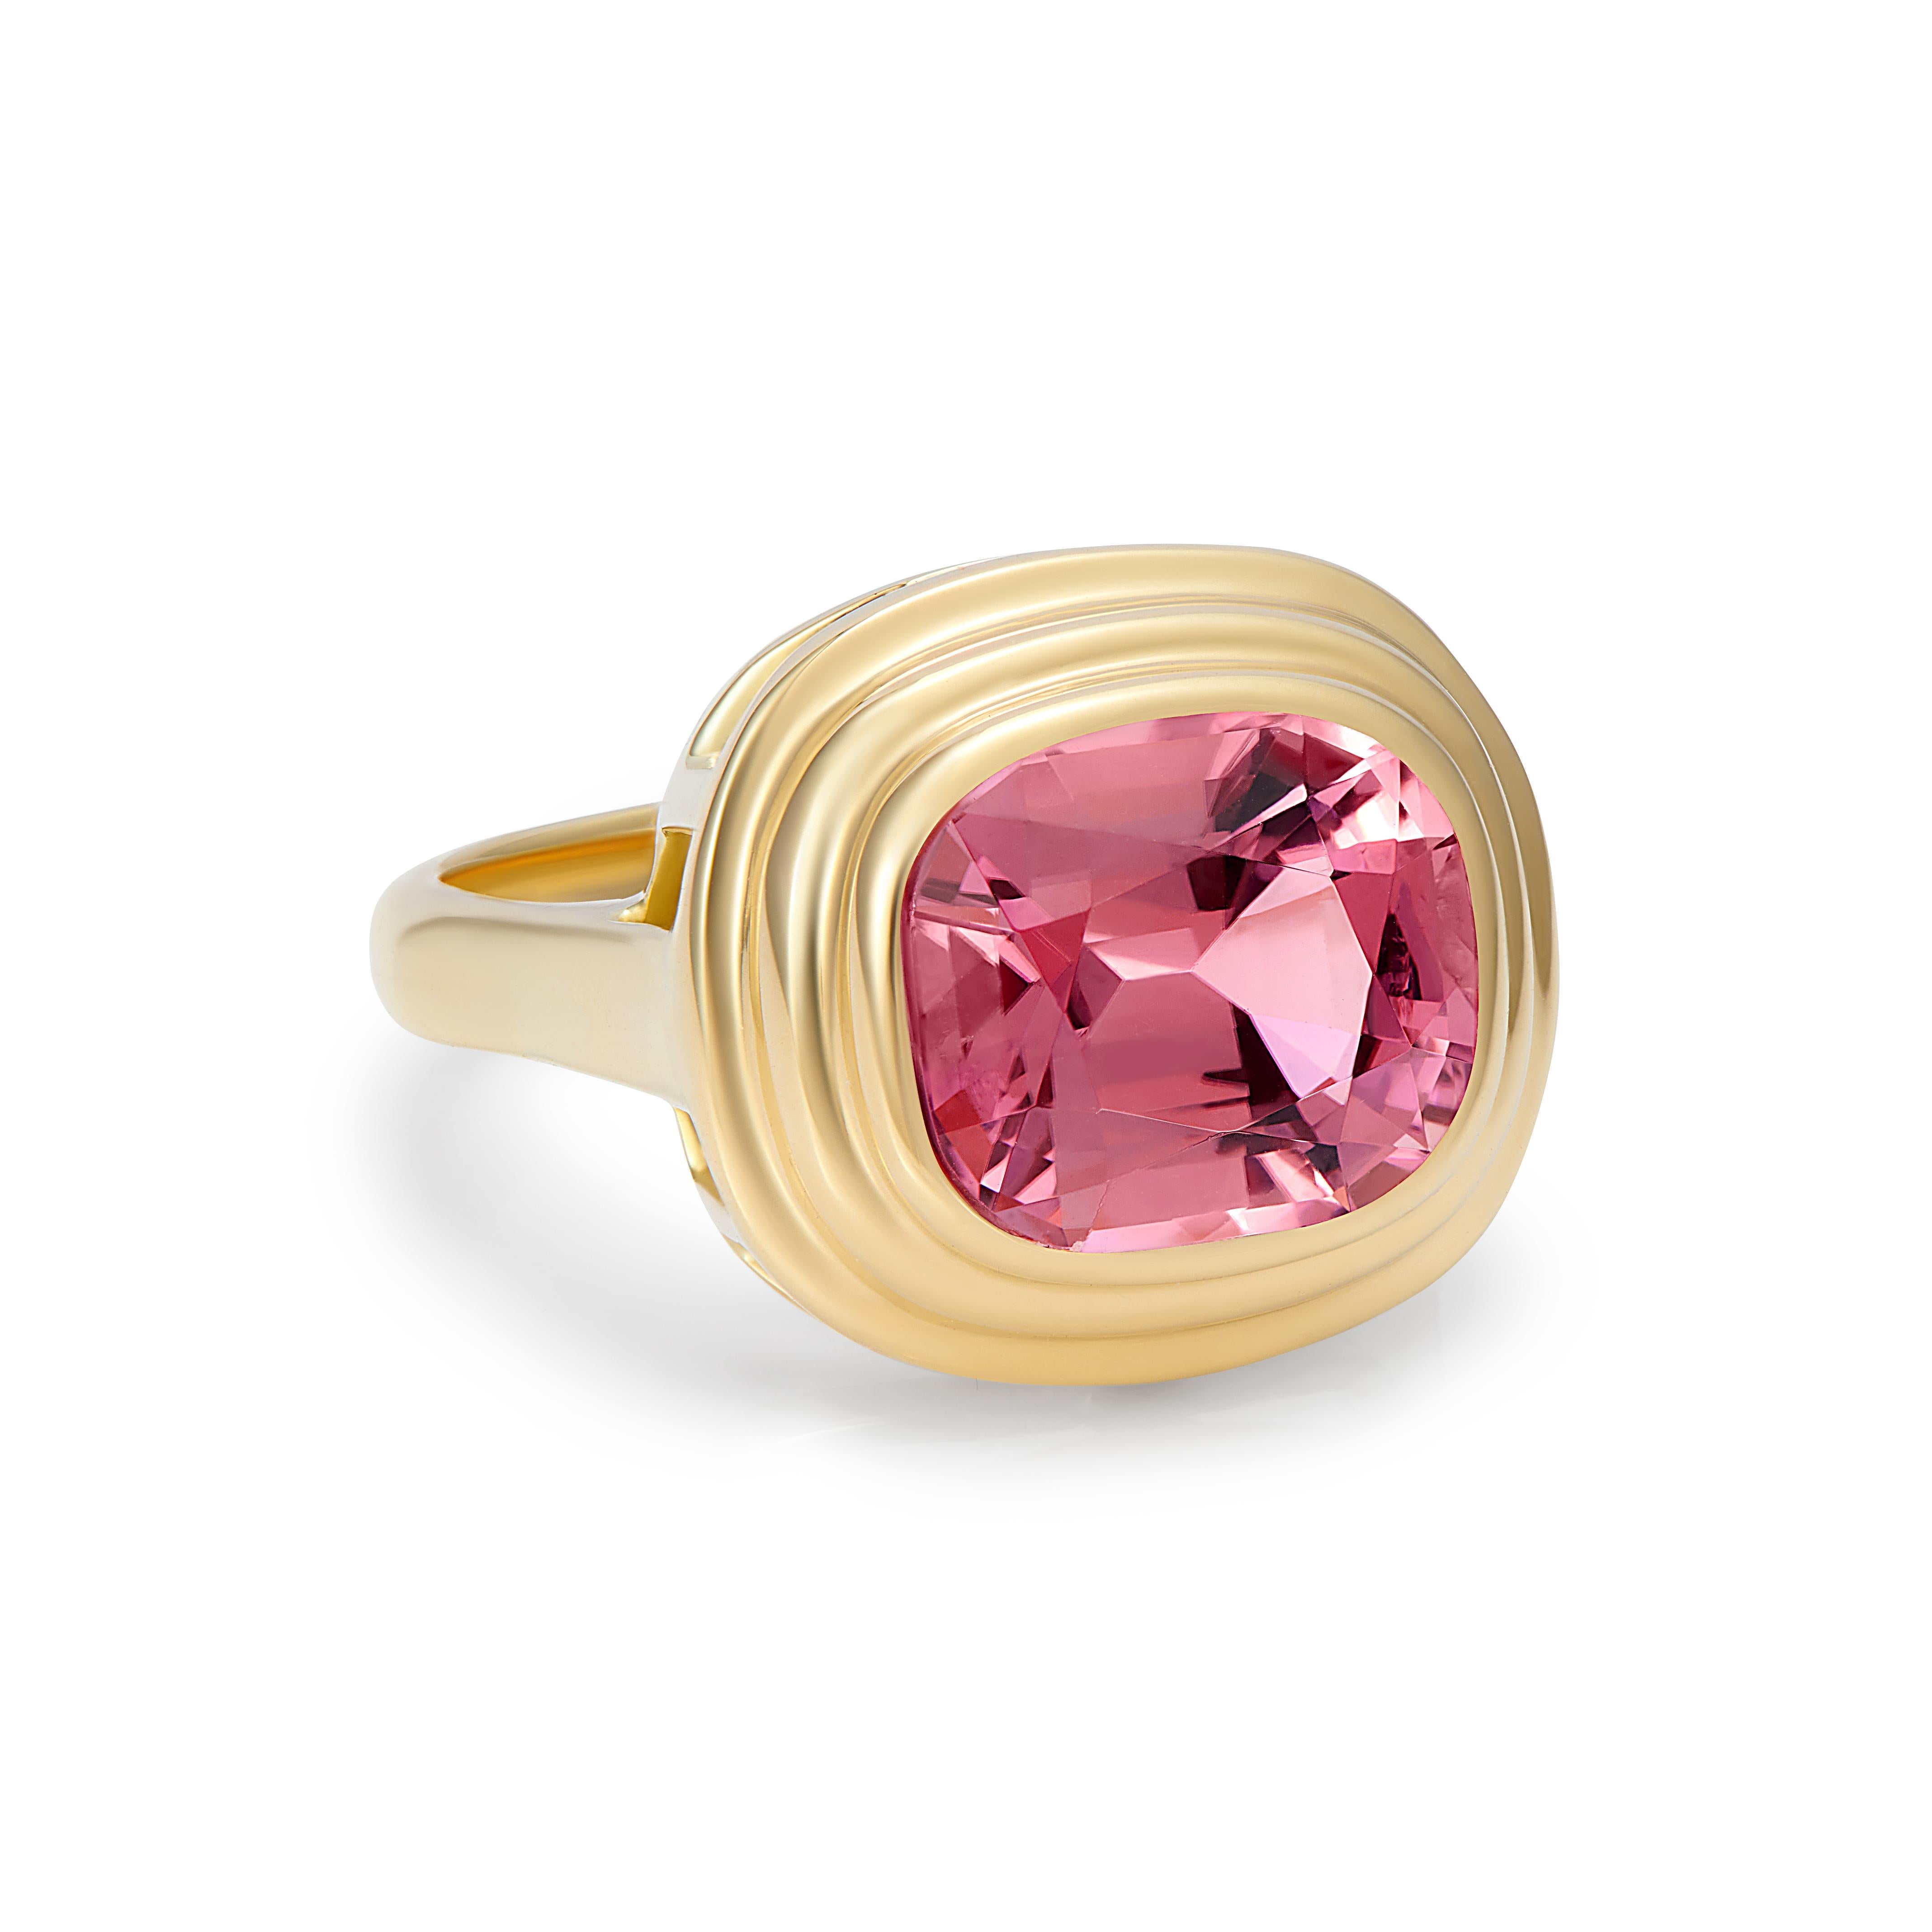  4.80ct Pink Tourmaline ring set in 18 karat yellow gold. This beautiful pink Tourmaline is a beautiful colour and in a wonderful statement size, forever changing in different lights. Each piece of this collection is unique due to the rarity of the